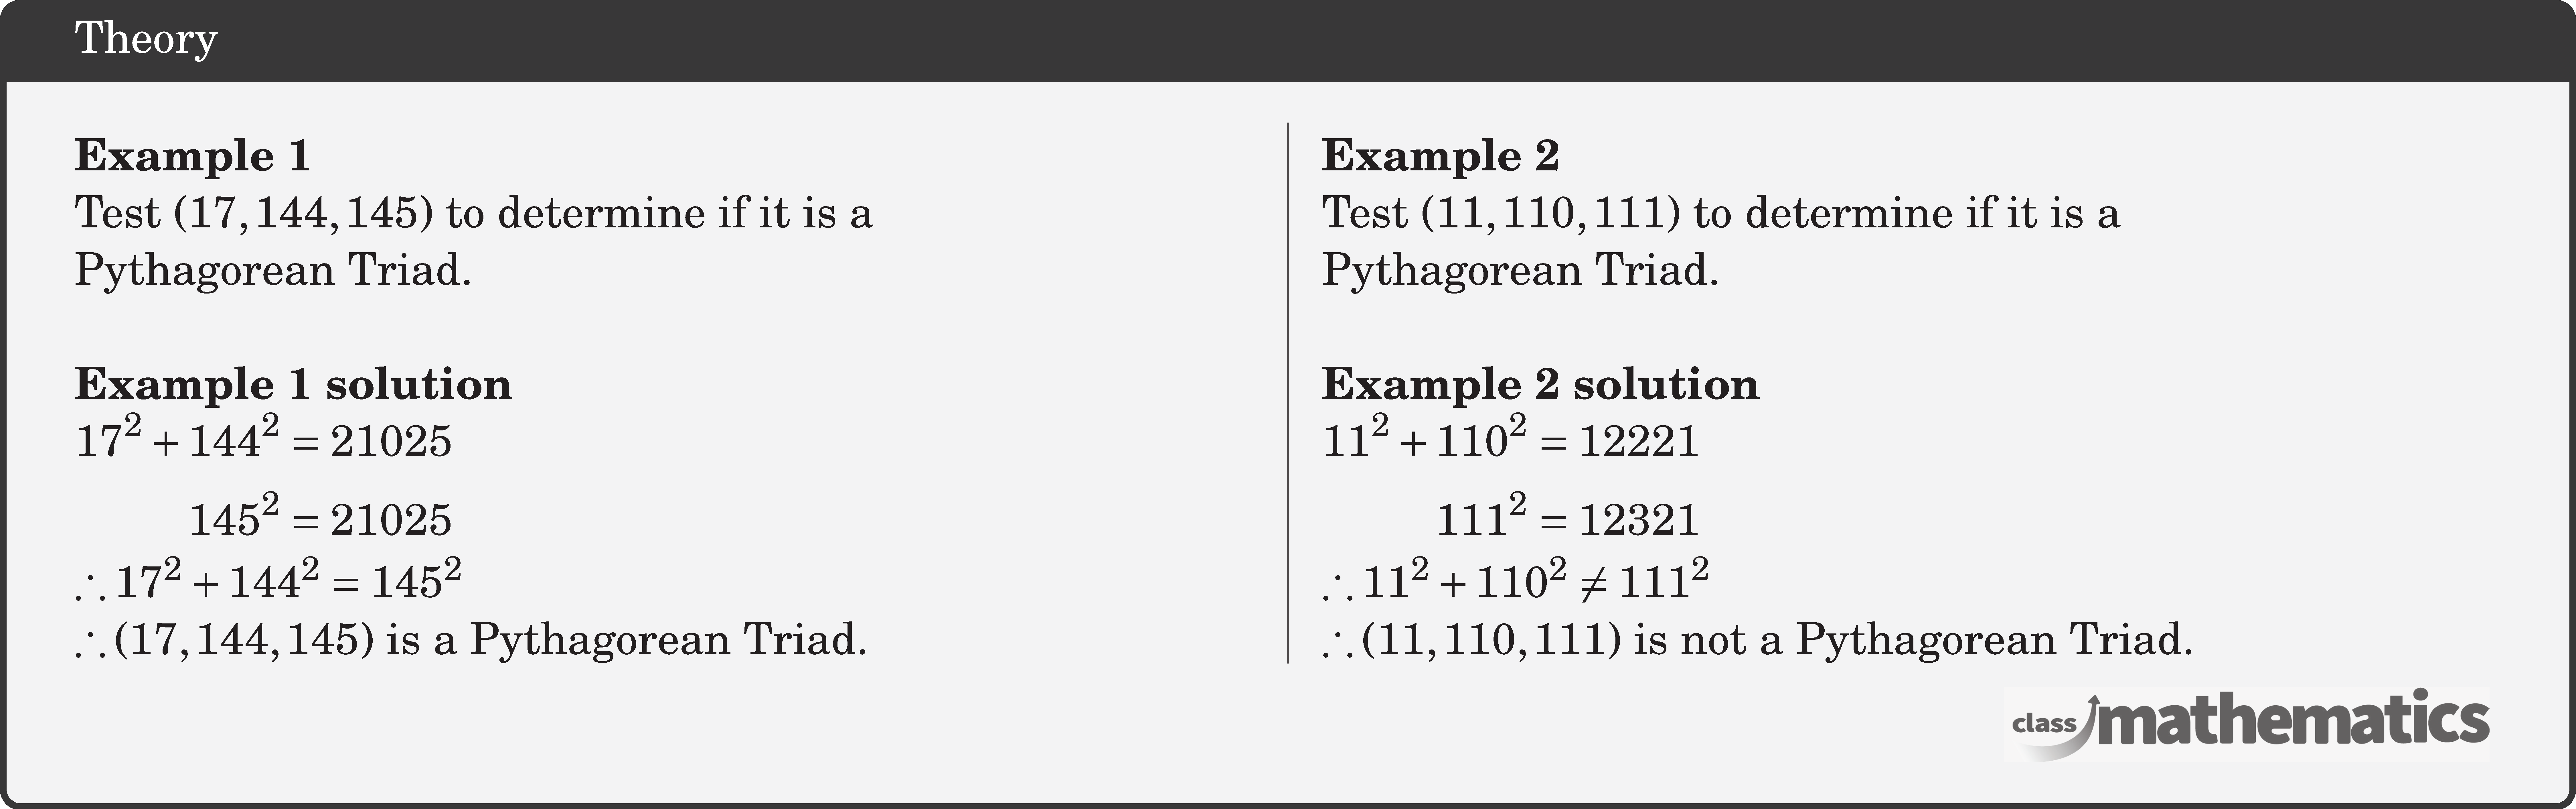 \begin{multicols}{2}  \textbf{Example 1}\\ Test \((17,144,145)\) to determine if it is a \\Pythagorean Triad.\\  \textbf{Example 1 solution}\\ \(\begin{aligned} 17^2+144^2&=21025 \\ 145^2&=21025  \end{aligned}\)\\ \(\therefore 17^2+144^2=145^2 \)\\ \(\therefore(17,144,145) \text { is a Pythagorean Triad. }\)  \columnbreak \textbf{Example 2}\\ Test \((11,110,111)\) to determine if it is a \\Pythagorean Triad.\\  \textbf{Example 2 solution}\\ \(\begin{aligned} 11^2+110^2&=12221 \\ 111^2&=12321  \end{aligned}\)\\ \(\therefore 11^2+110^2\neq 111^2 \)\\ \(\therefore(11,110,111) \text { is not a Pythagorean Triad. }\) \end{multicols}